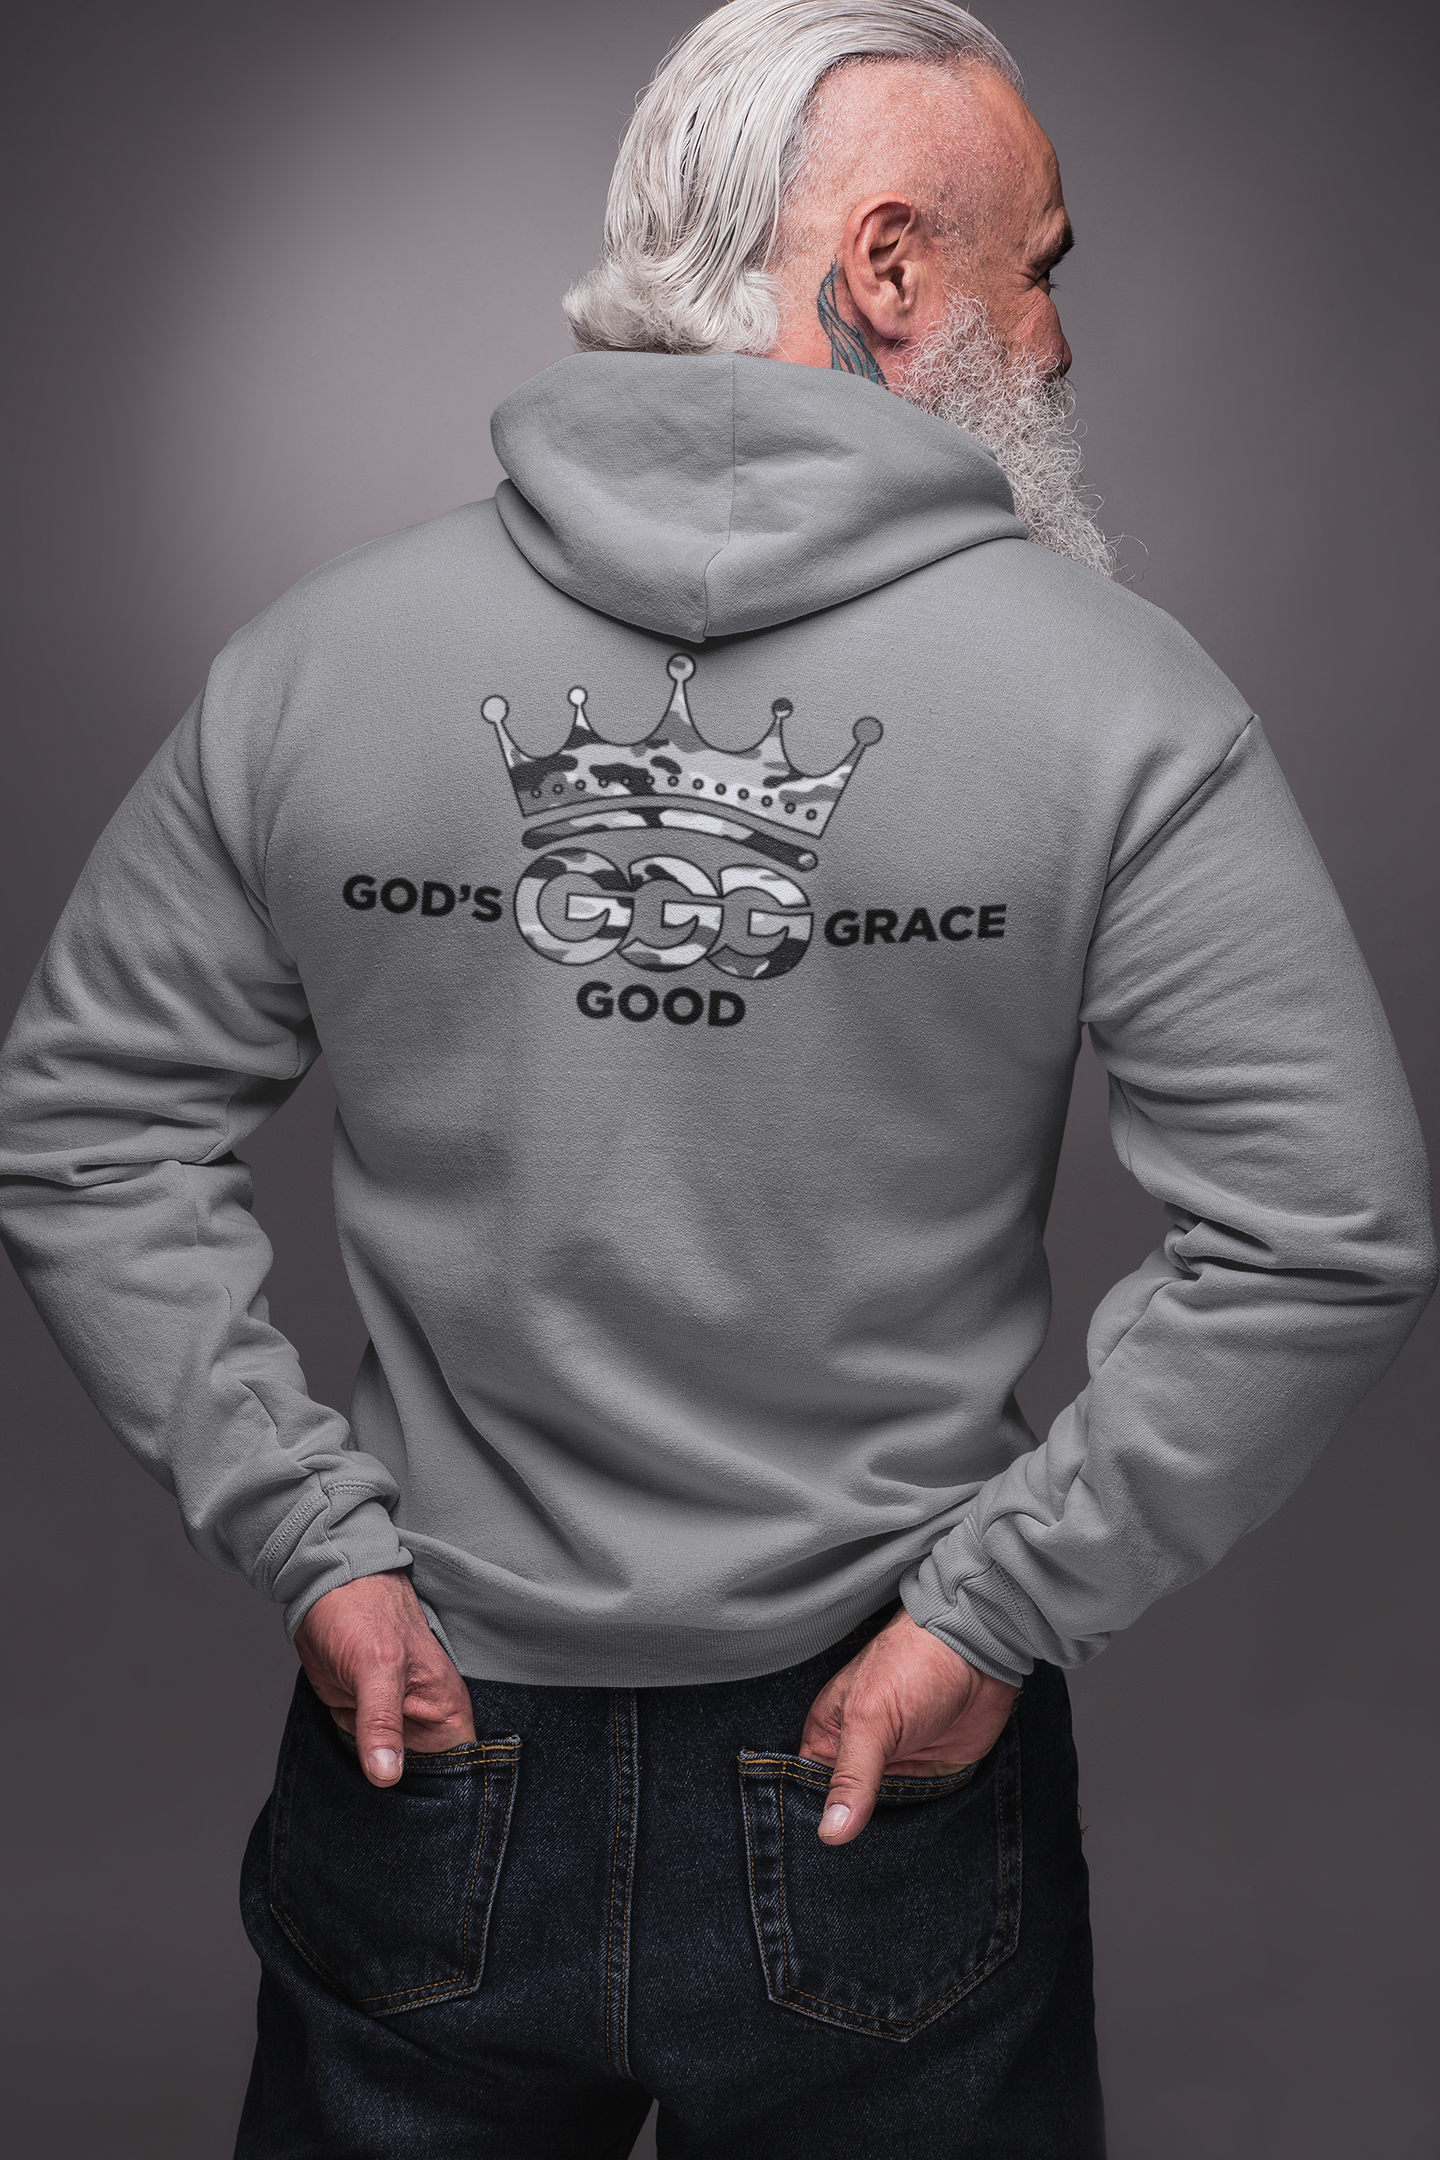 Load video: GRAND OPENING COMMERCIAL FOR MY CLOTHING LINE entitled: ~GODS GOOD GRACE GEAR~  including over 60 garments available tshirts ($15 - $26)   hoodies ($40 - $47) C O M E   S H O P!!   A portion of my proceeds goes to feeding the homeless and helping individuals fighting terminal illnesses   Thanks for the support and come Glorify GOD by rocking it on your chest  Im Humphrey Deion HD and the song in this promo is written,produced and sung by me entitled  &quot;Wont He Do It&quot;  for more of my music check me out on Spotify, AppleMusic and all other major platforms PRAISE GOD